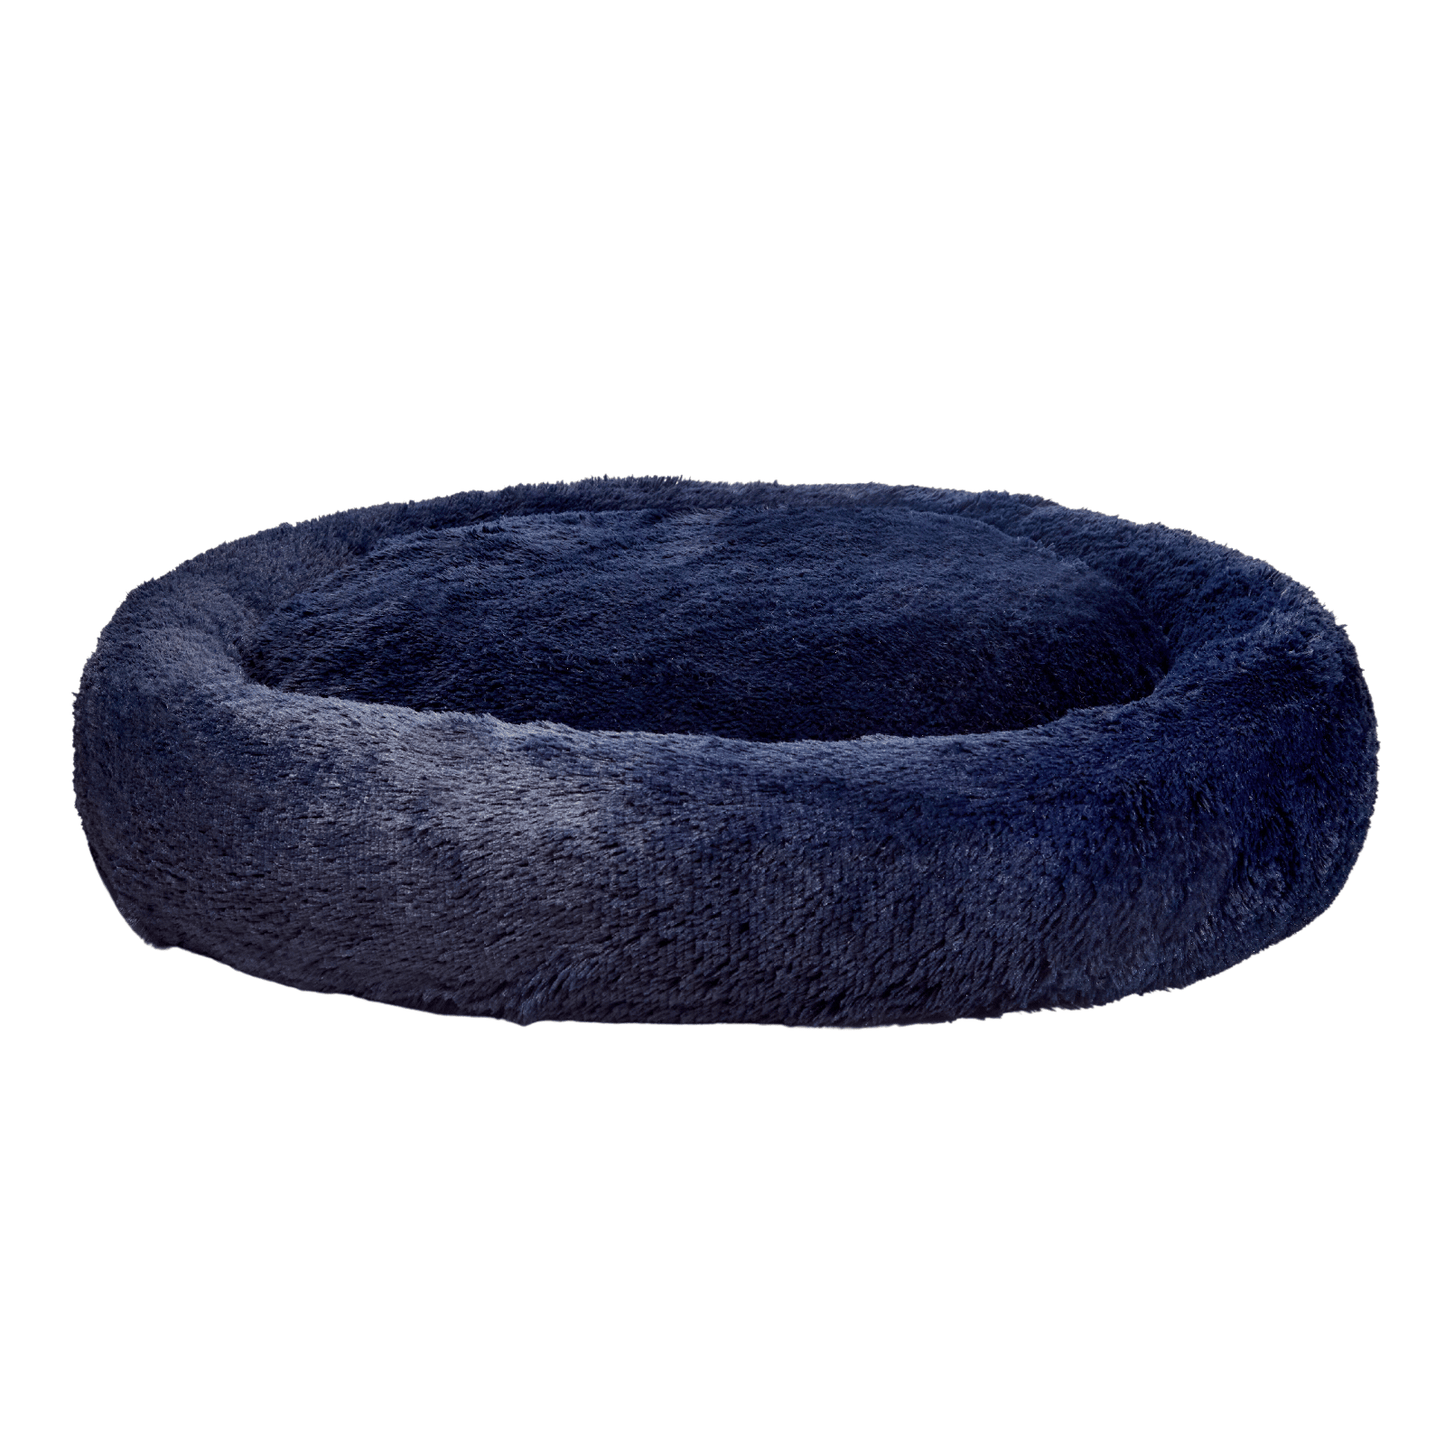 Replacement Covers - "Aussie" Calming Dog Bed